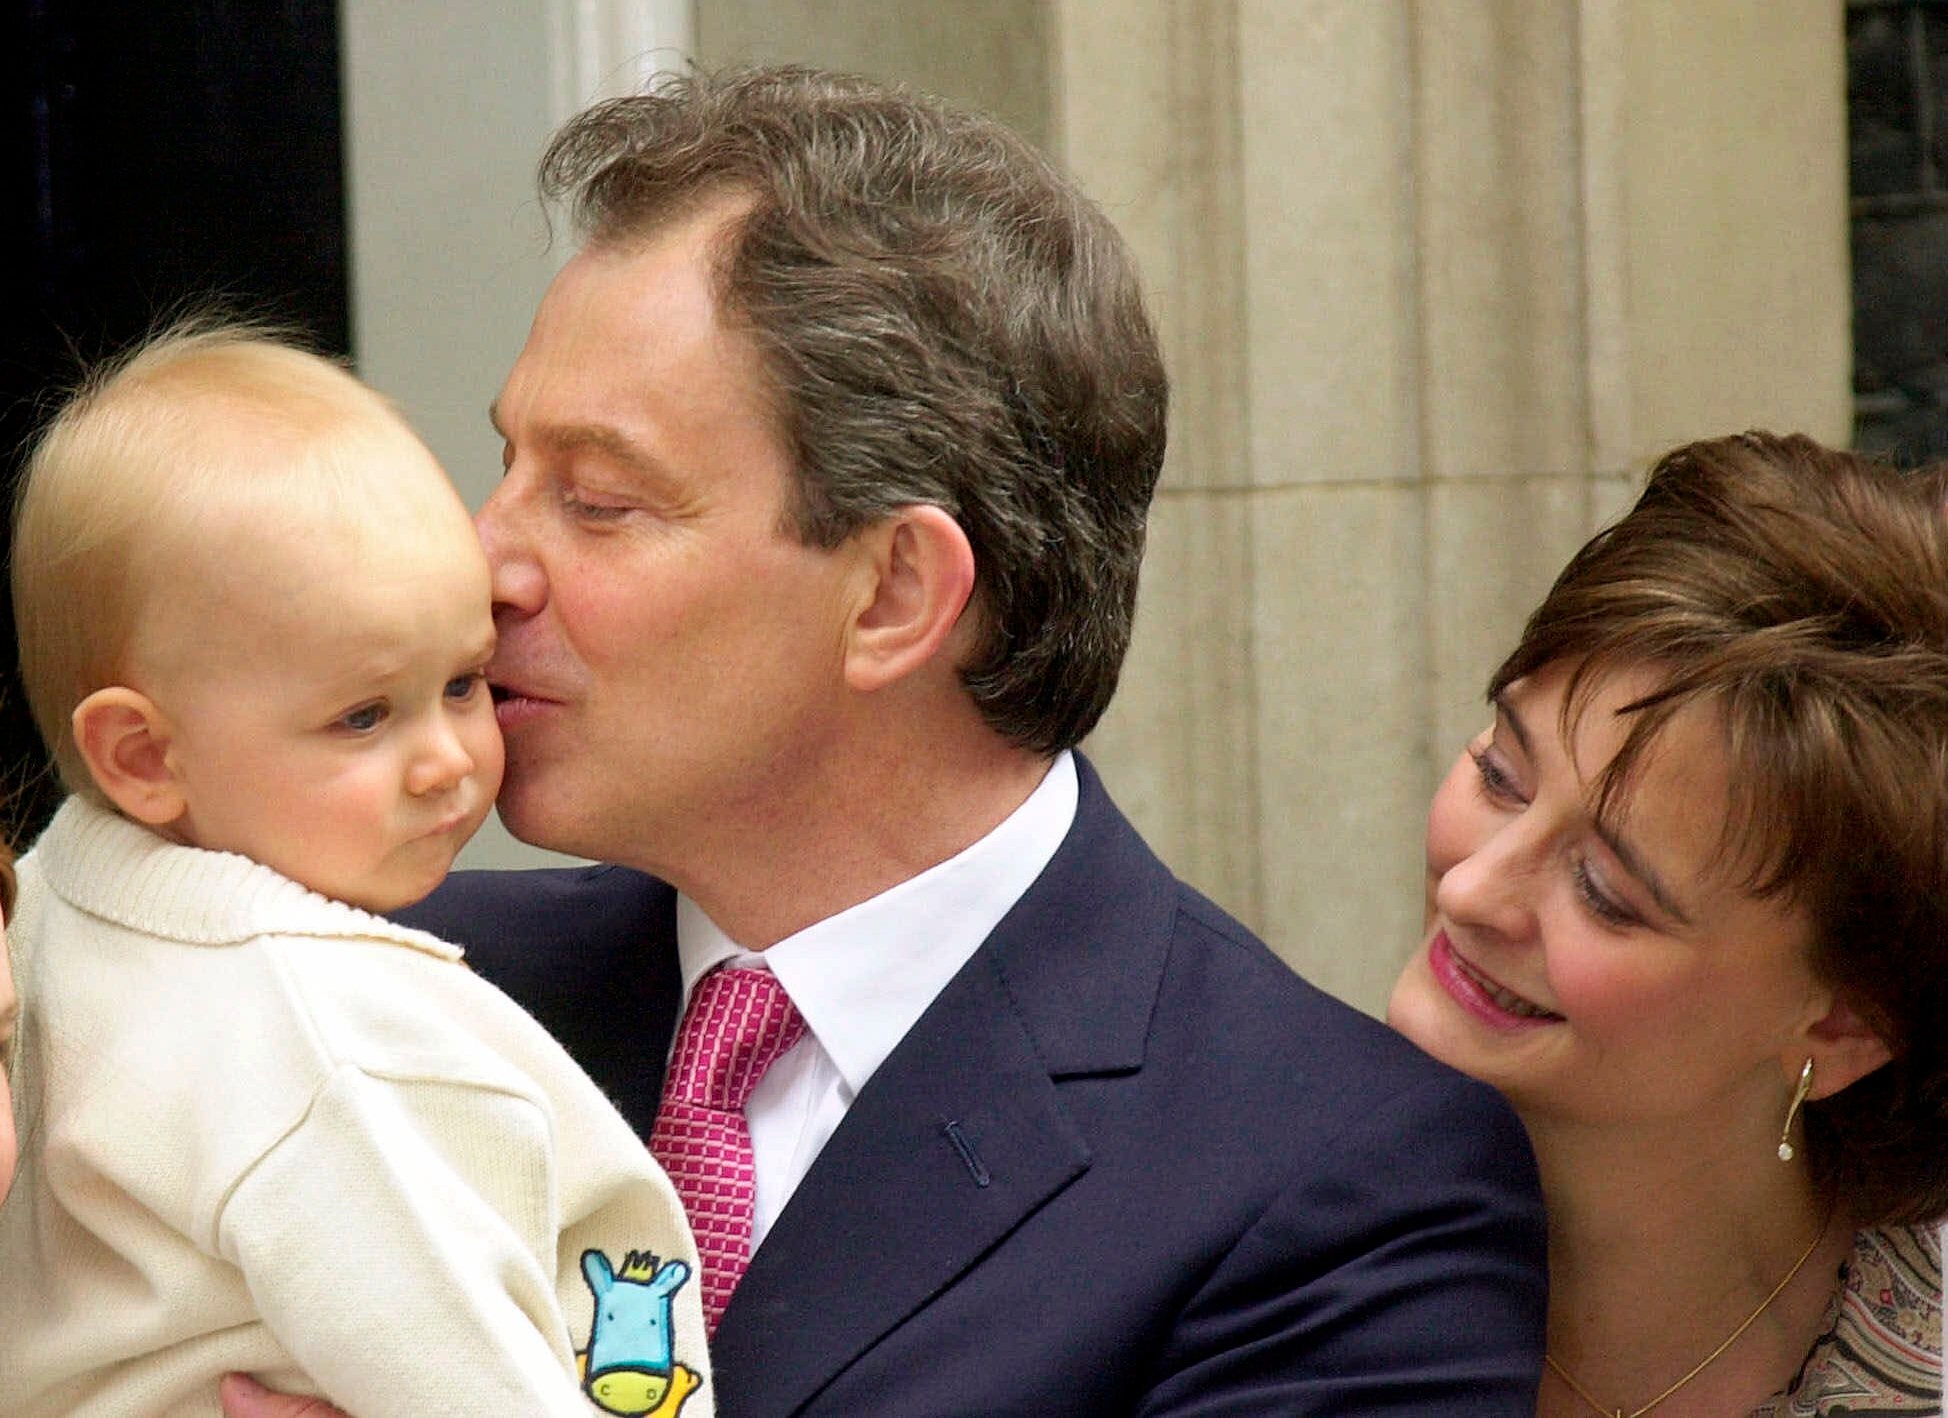 Tony Blair kisses his baby son Leo outside No 10 Downing Street as his wife, Cherie, watches on (8 June 2001)